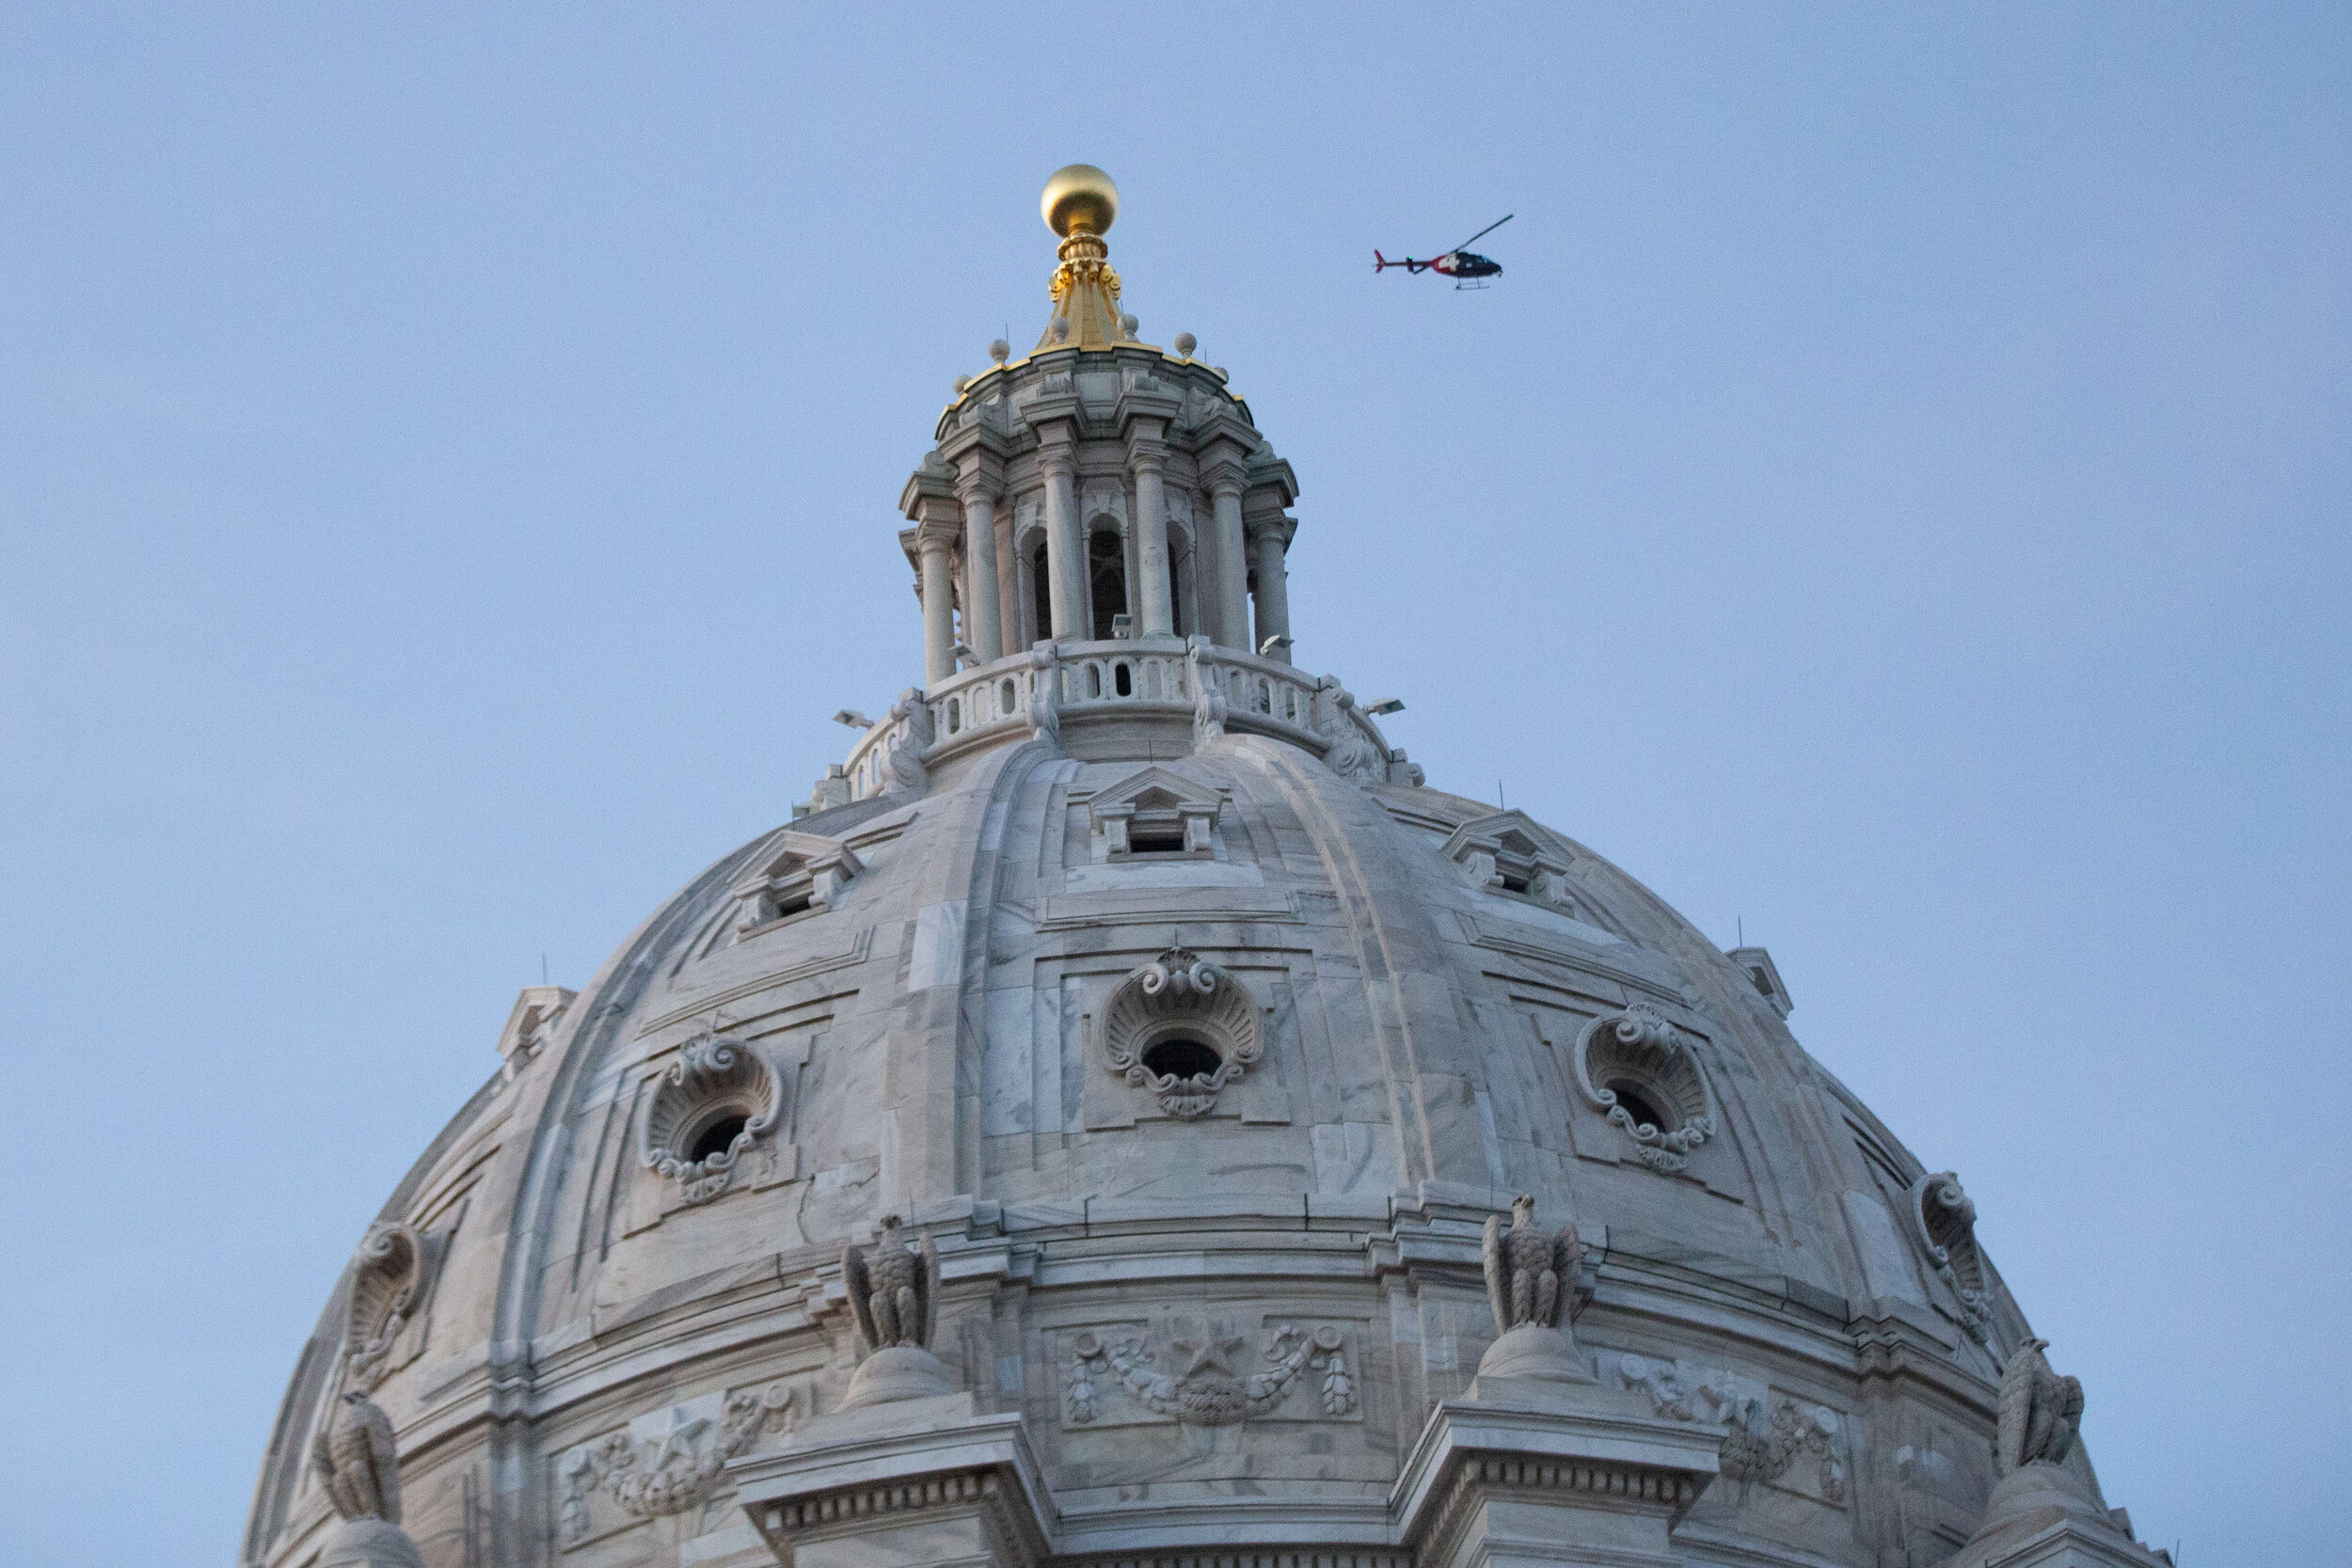  A news chopper flies over the Minnesota State Capitol building in Saint Paul during a protest over the police killing of George Floyd on June 1, 2020. Chris Juhn/Zenger 